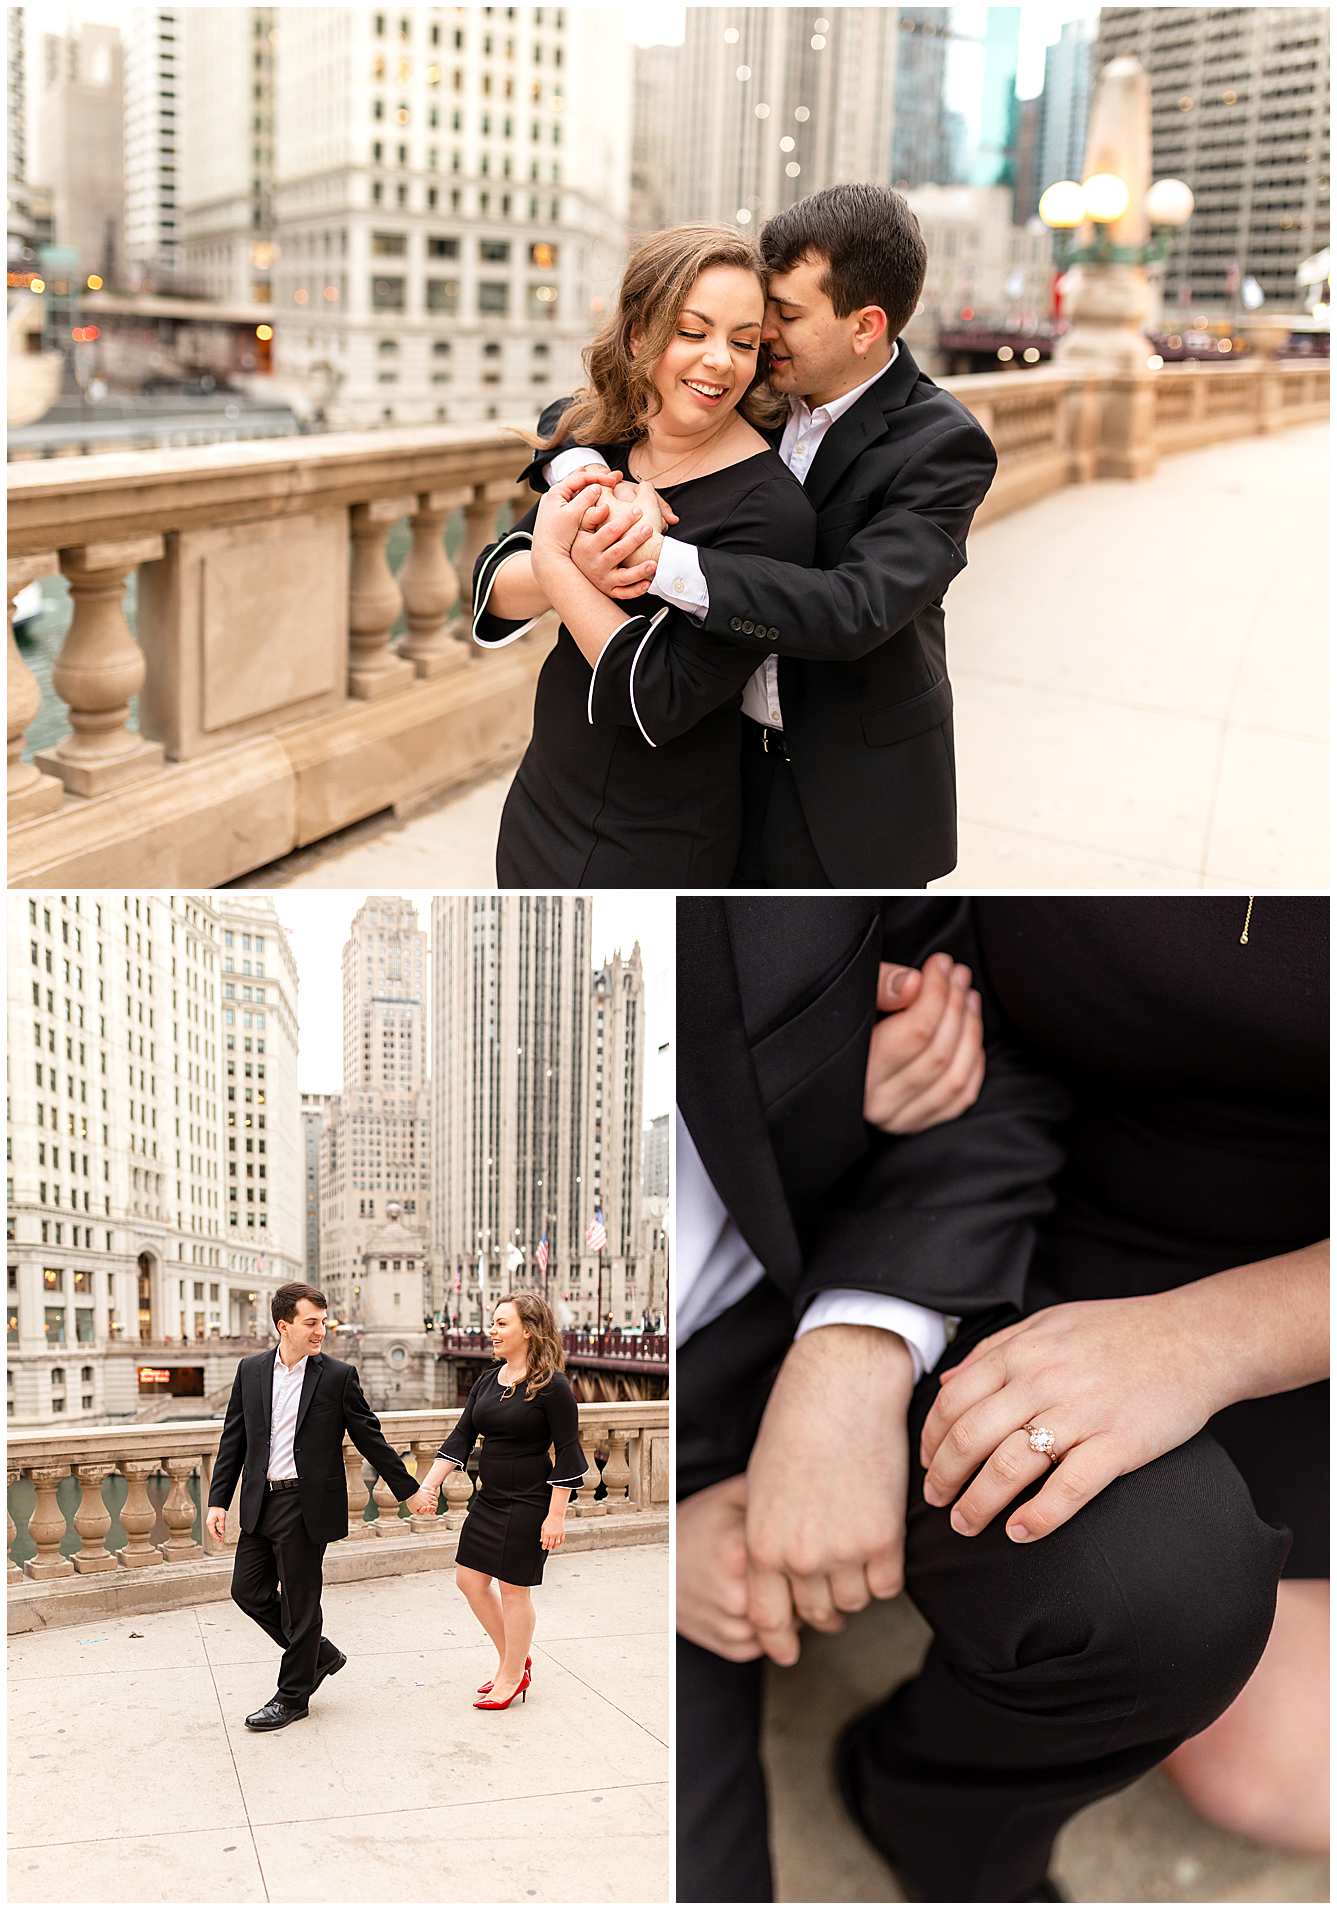 Spring Engagement Photos at The Wrigley Building, Chicago IL Engagement 